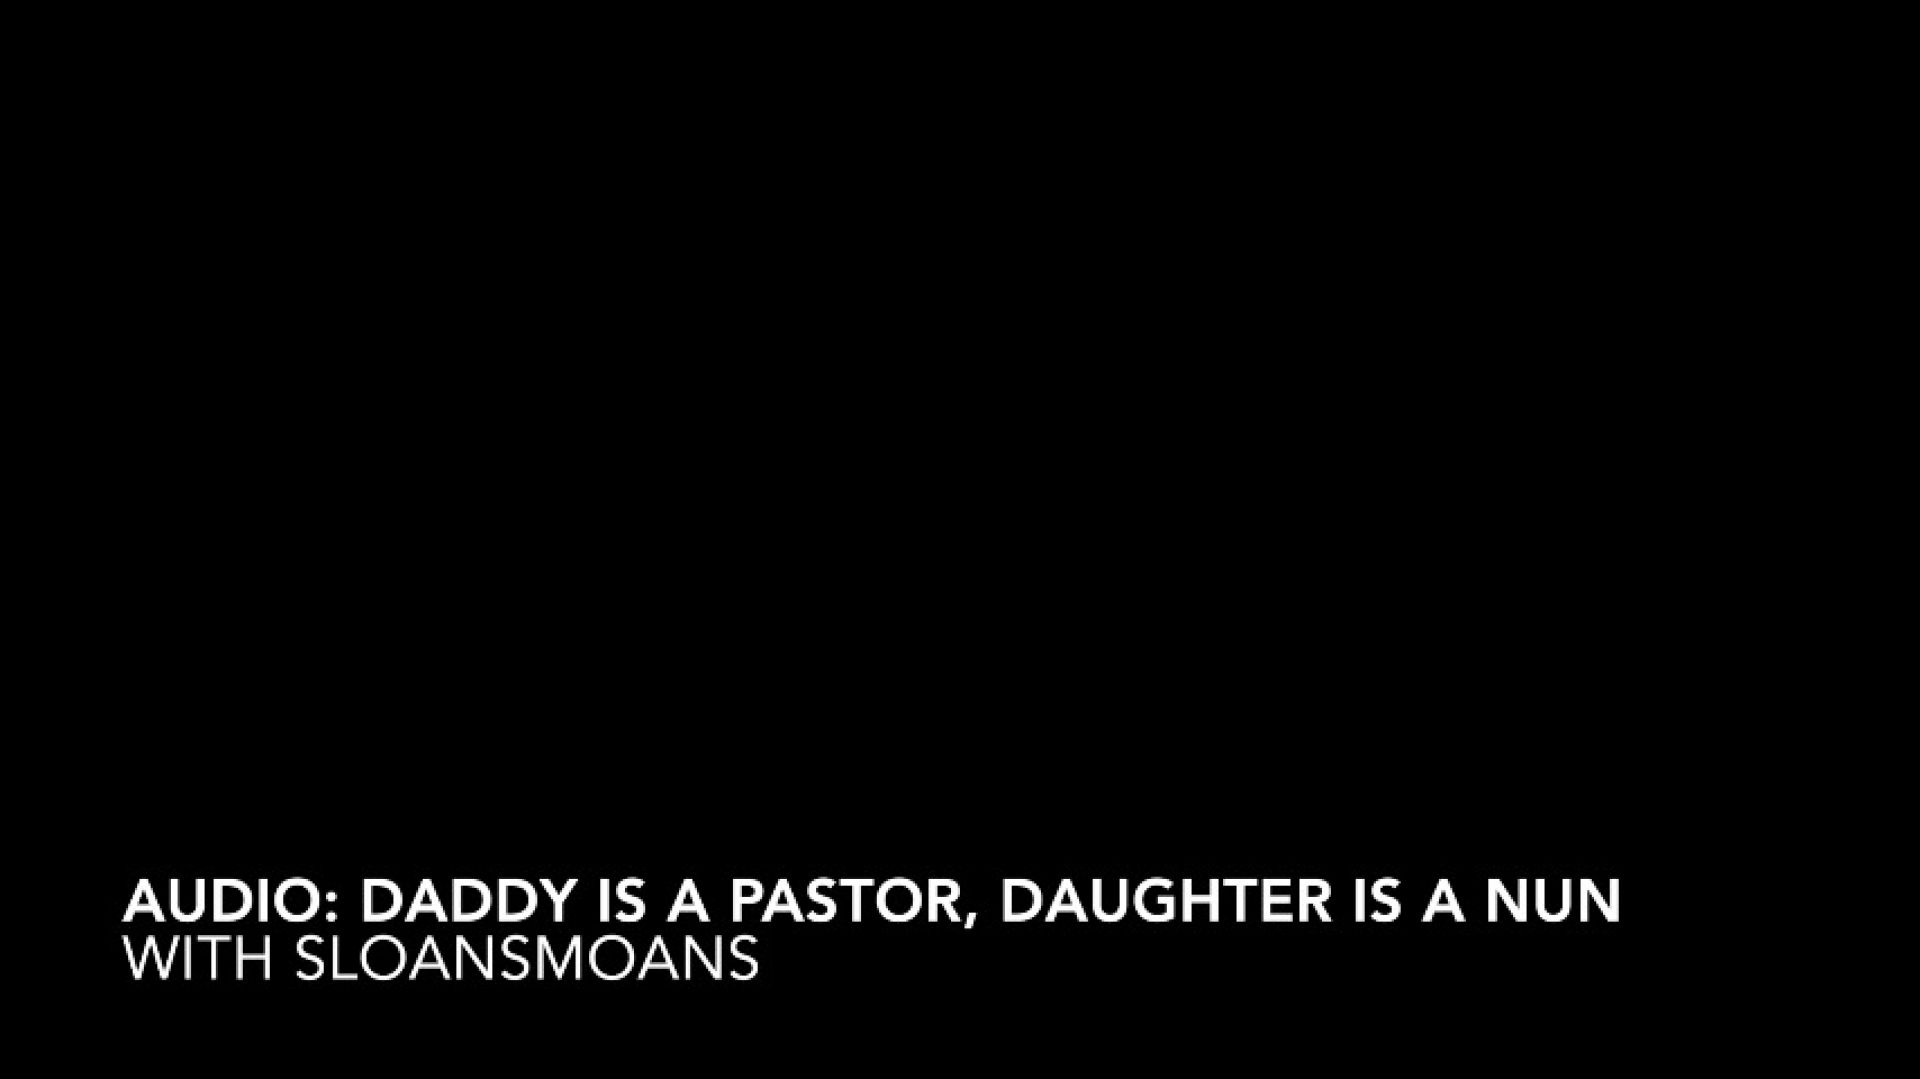 leaked audio: daddy is a pastor, daughter is a nun video thumbnail